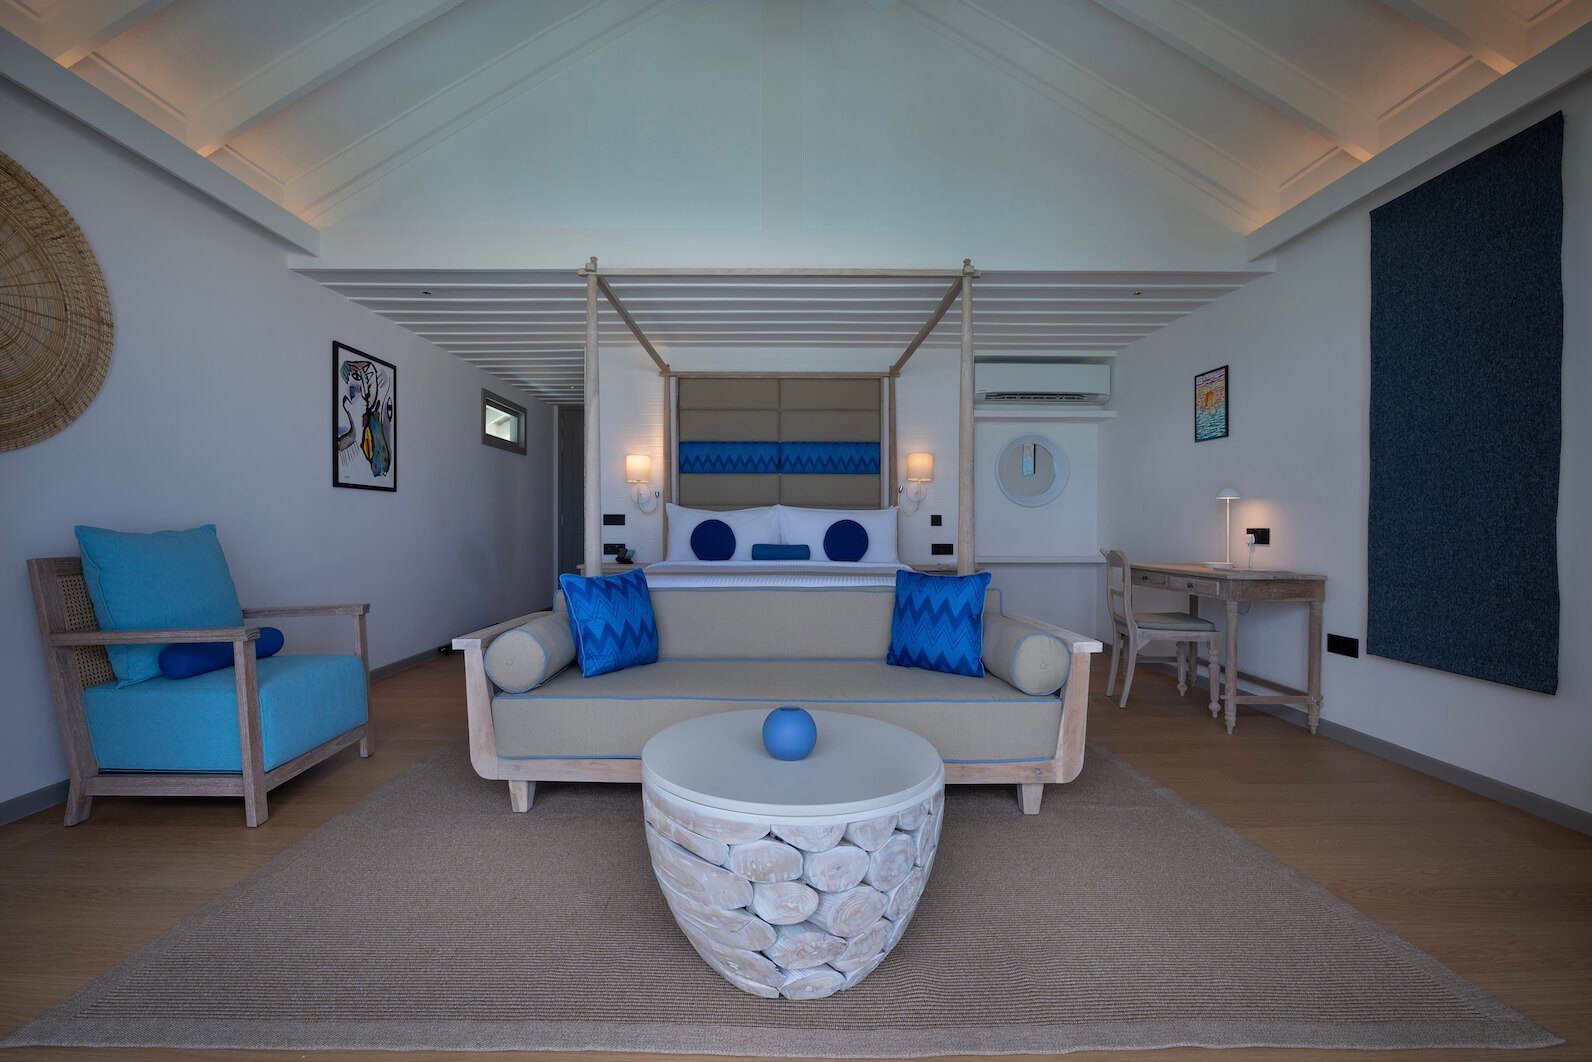 CHECK OUT OUR GROUP EDITORS LATEST LUXURIA LIFESTYLE INTERNATIONAL REVIEW OF THE AMAZING CORA CORA MALDIVES RESORT, IT'S FREEDOM TIME...